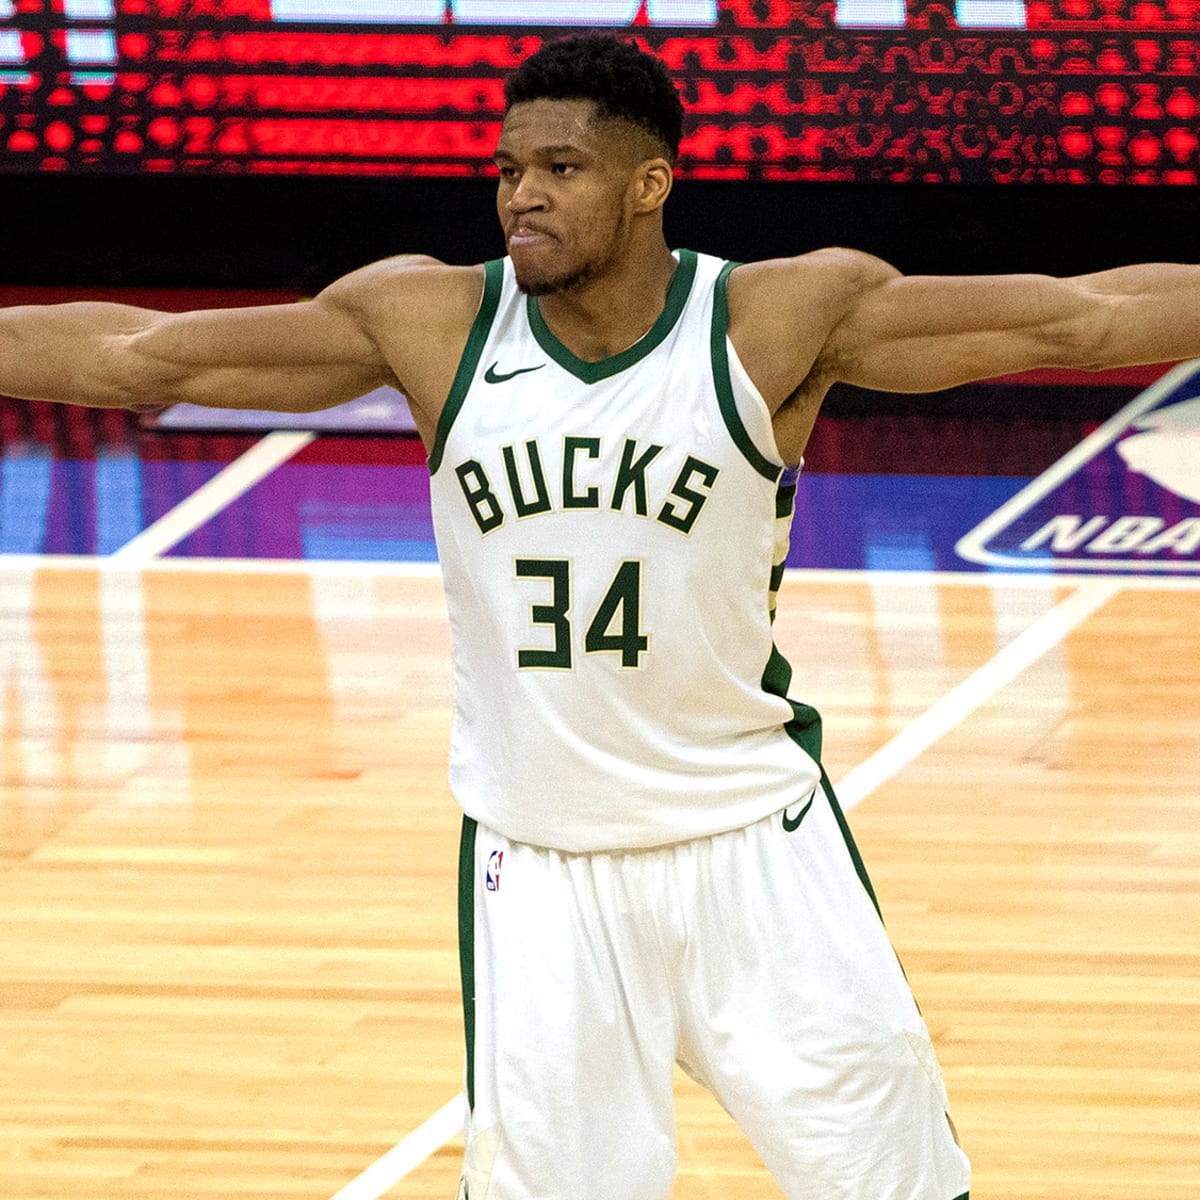 Giannis Antetokounmpo: The Story of How Giannis Antetokounmpo Became the  Most Exciting Player in the NBA